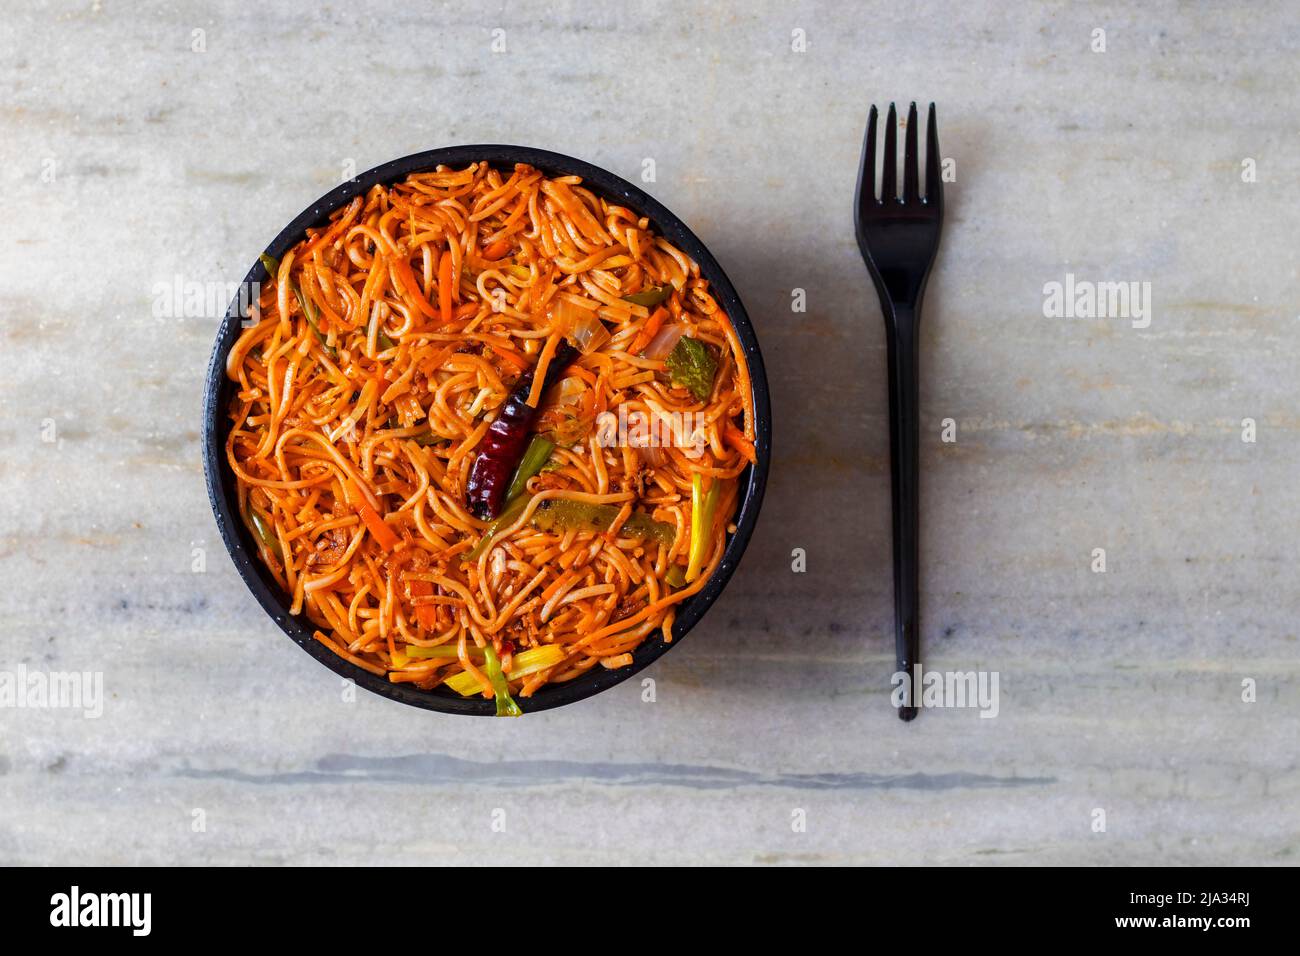 Delicious Chinese food Hakka Noodles is ready to eat. Stock Photo